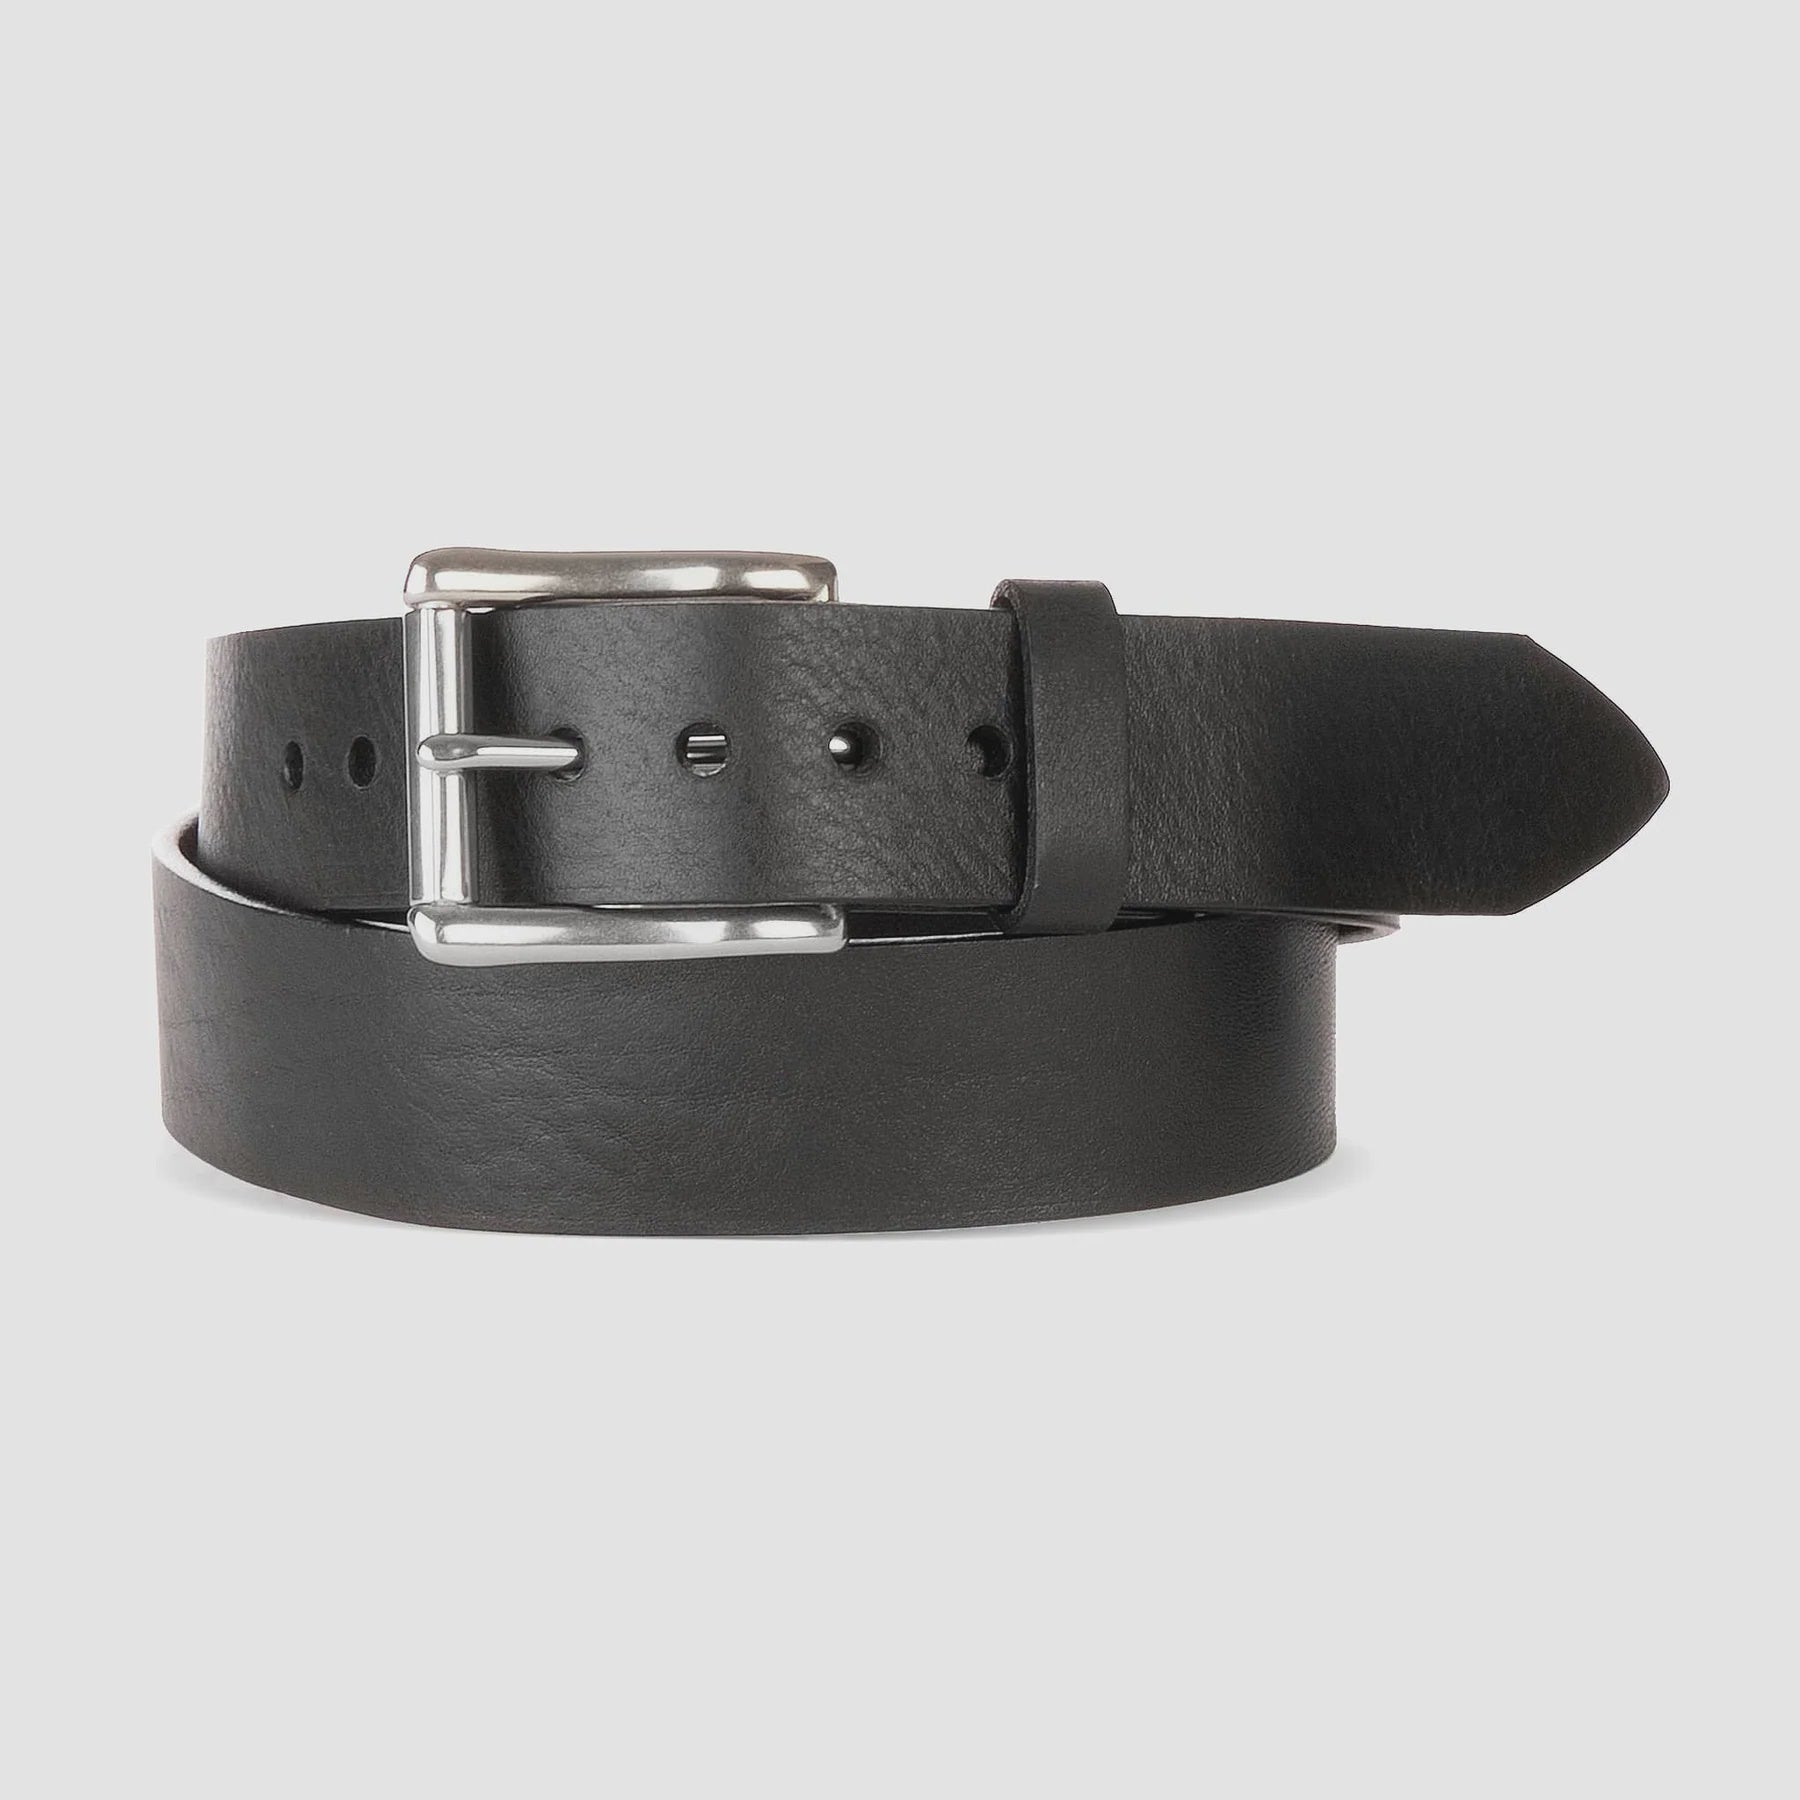 BRAVE LEATHER - MEN'S CLASSIC LEATHER BELT IN BLACK/SILVER